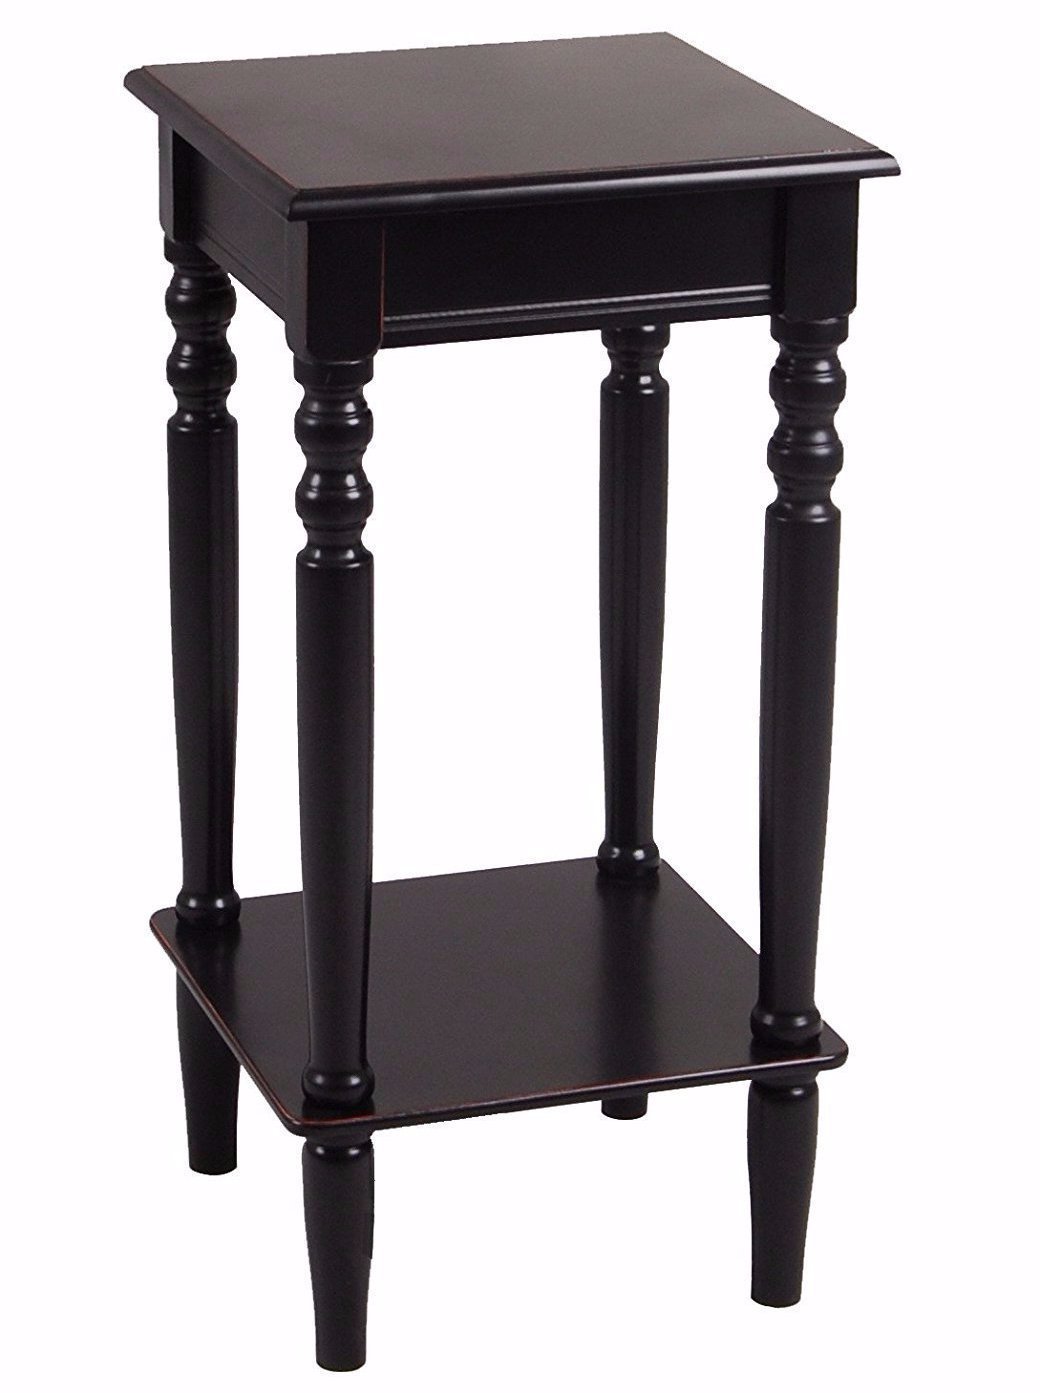 accent side table square antique black urbanest small marble top coffee hairpin bedside barley twist target project casual dining sets room runners resin patio with umbrella hole